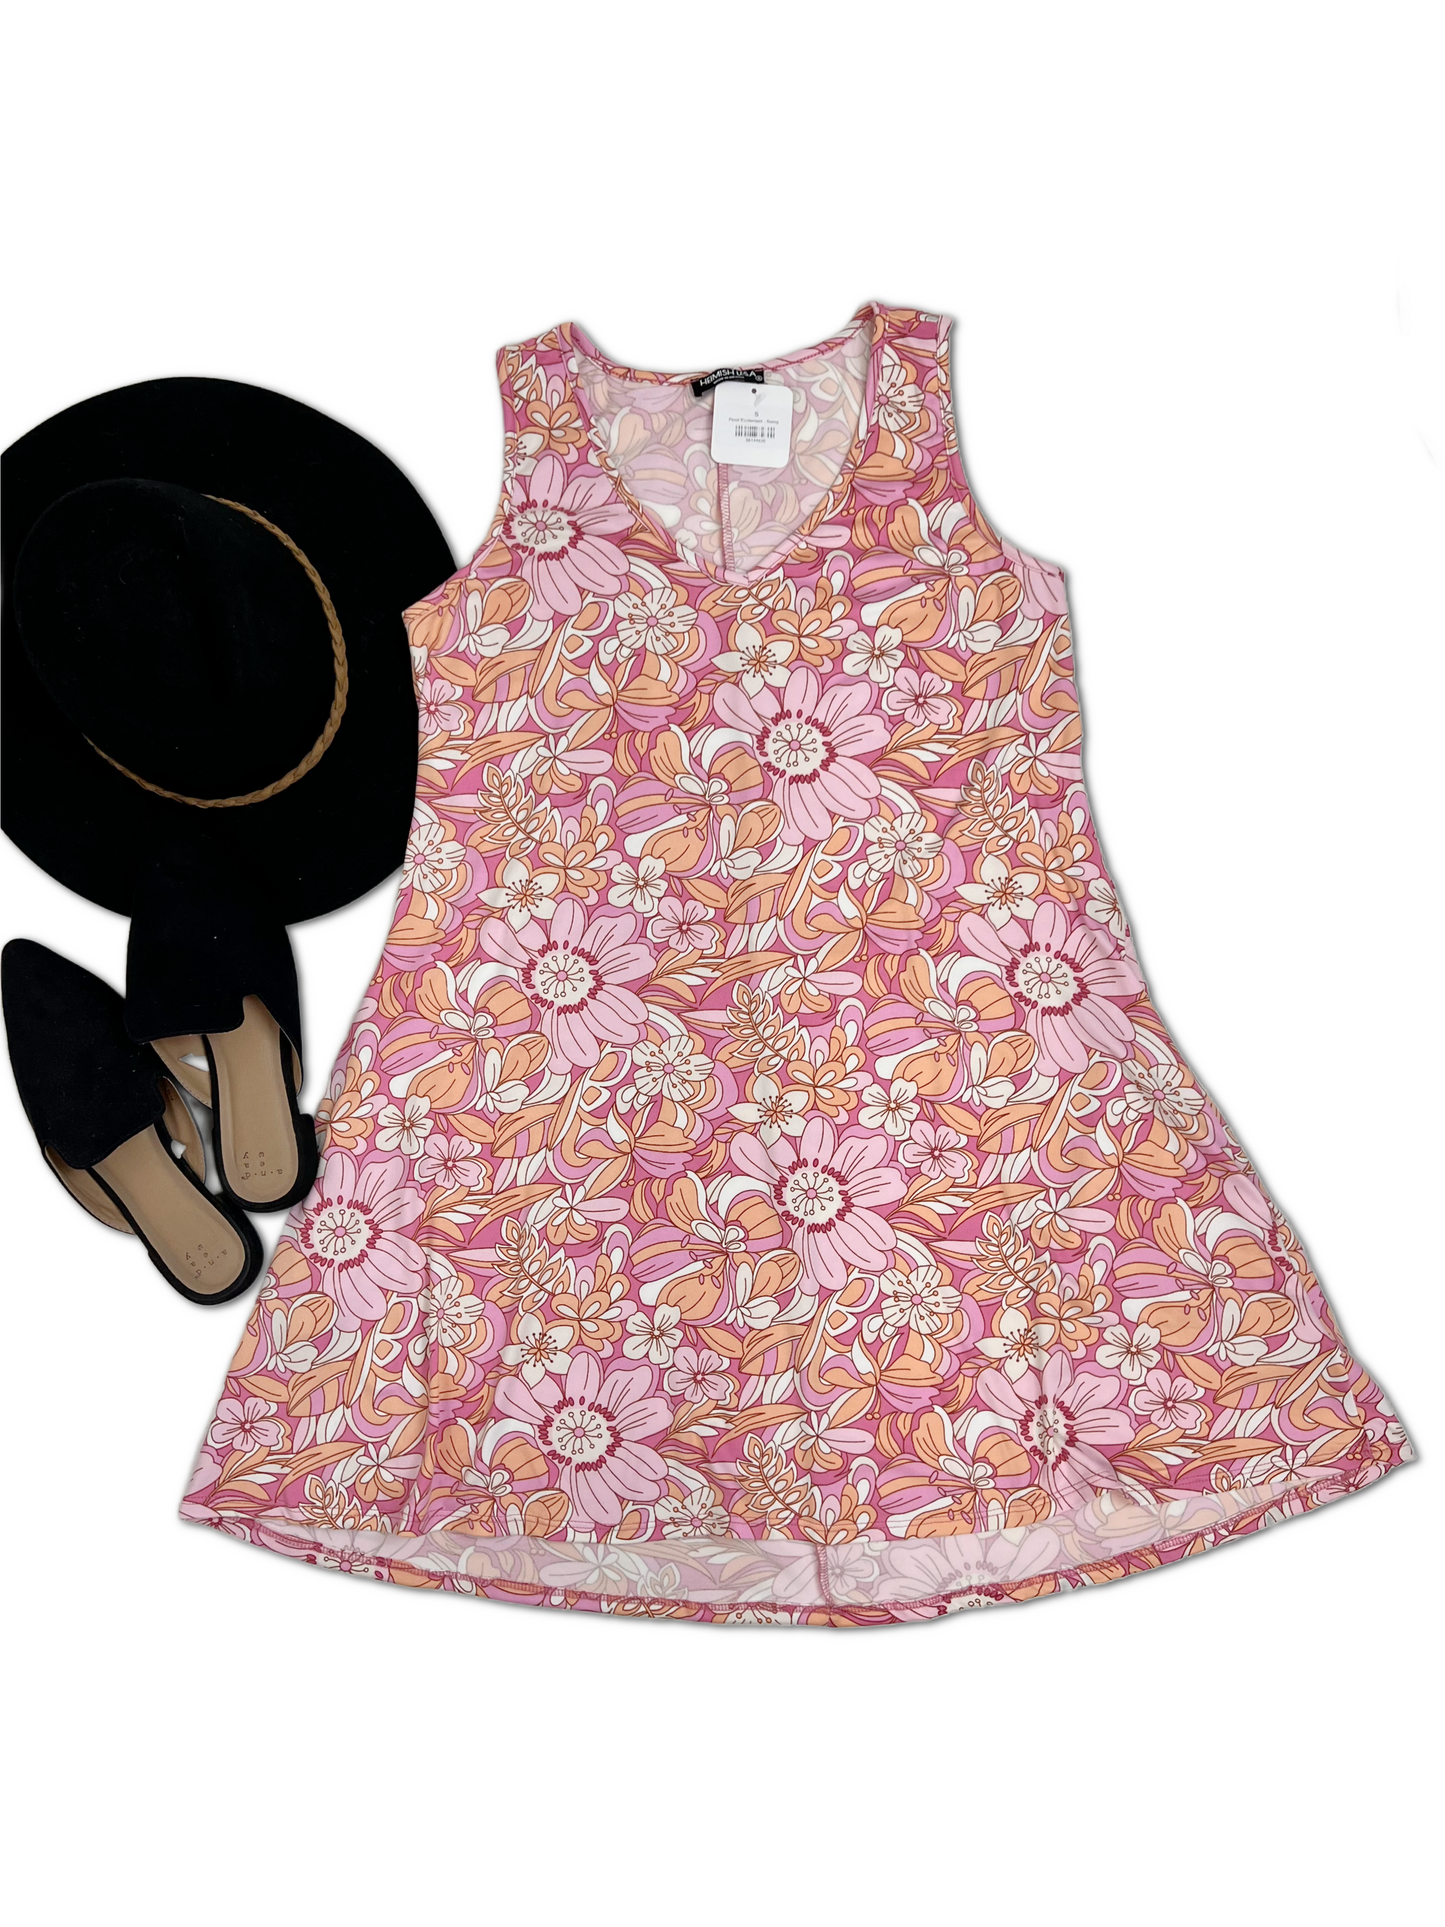 Floral Excitement - Swing Dress